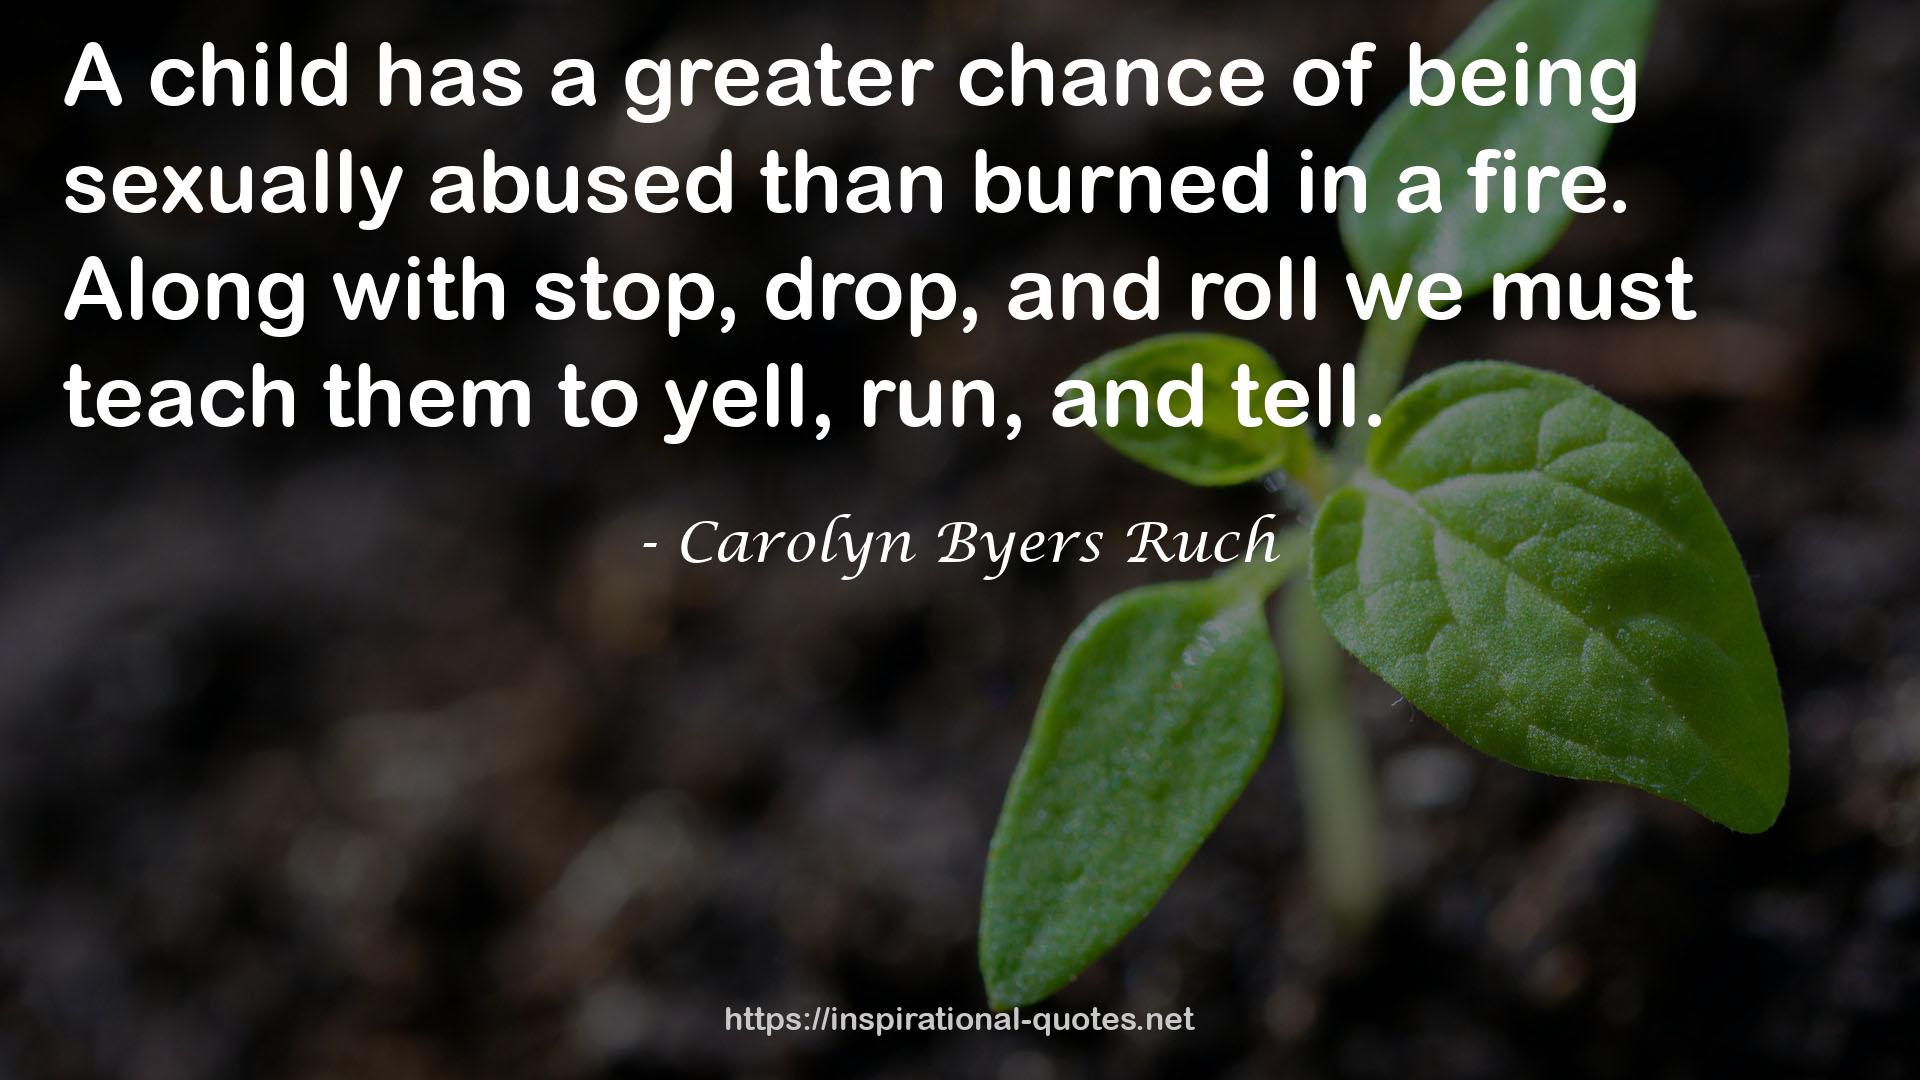 Carolyn Byers Ruch QUOTES